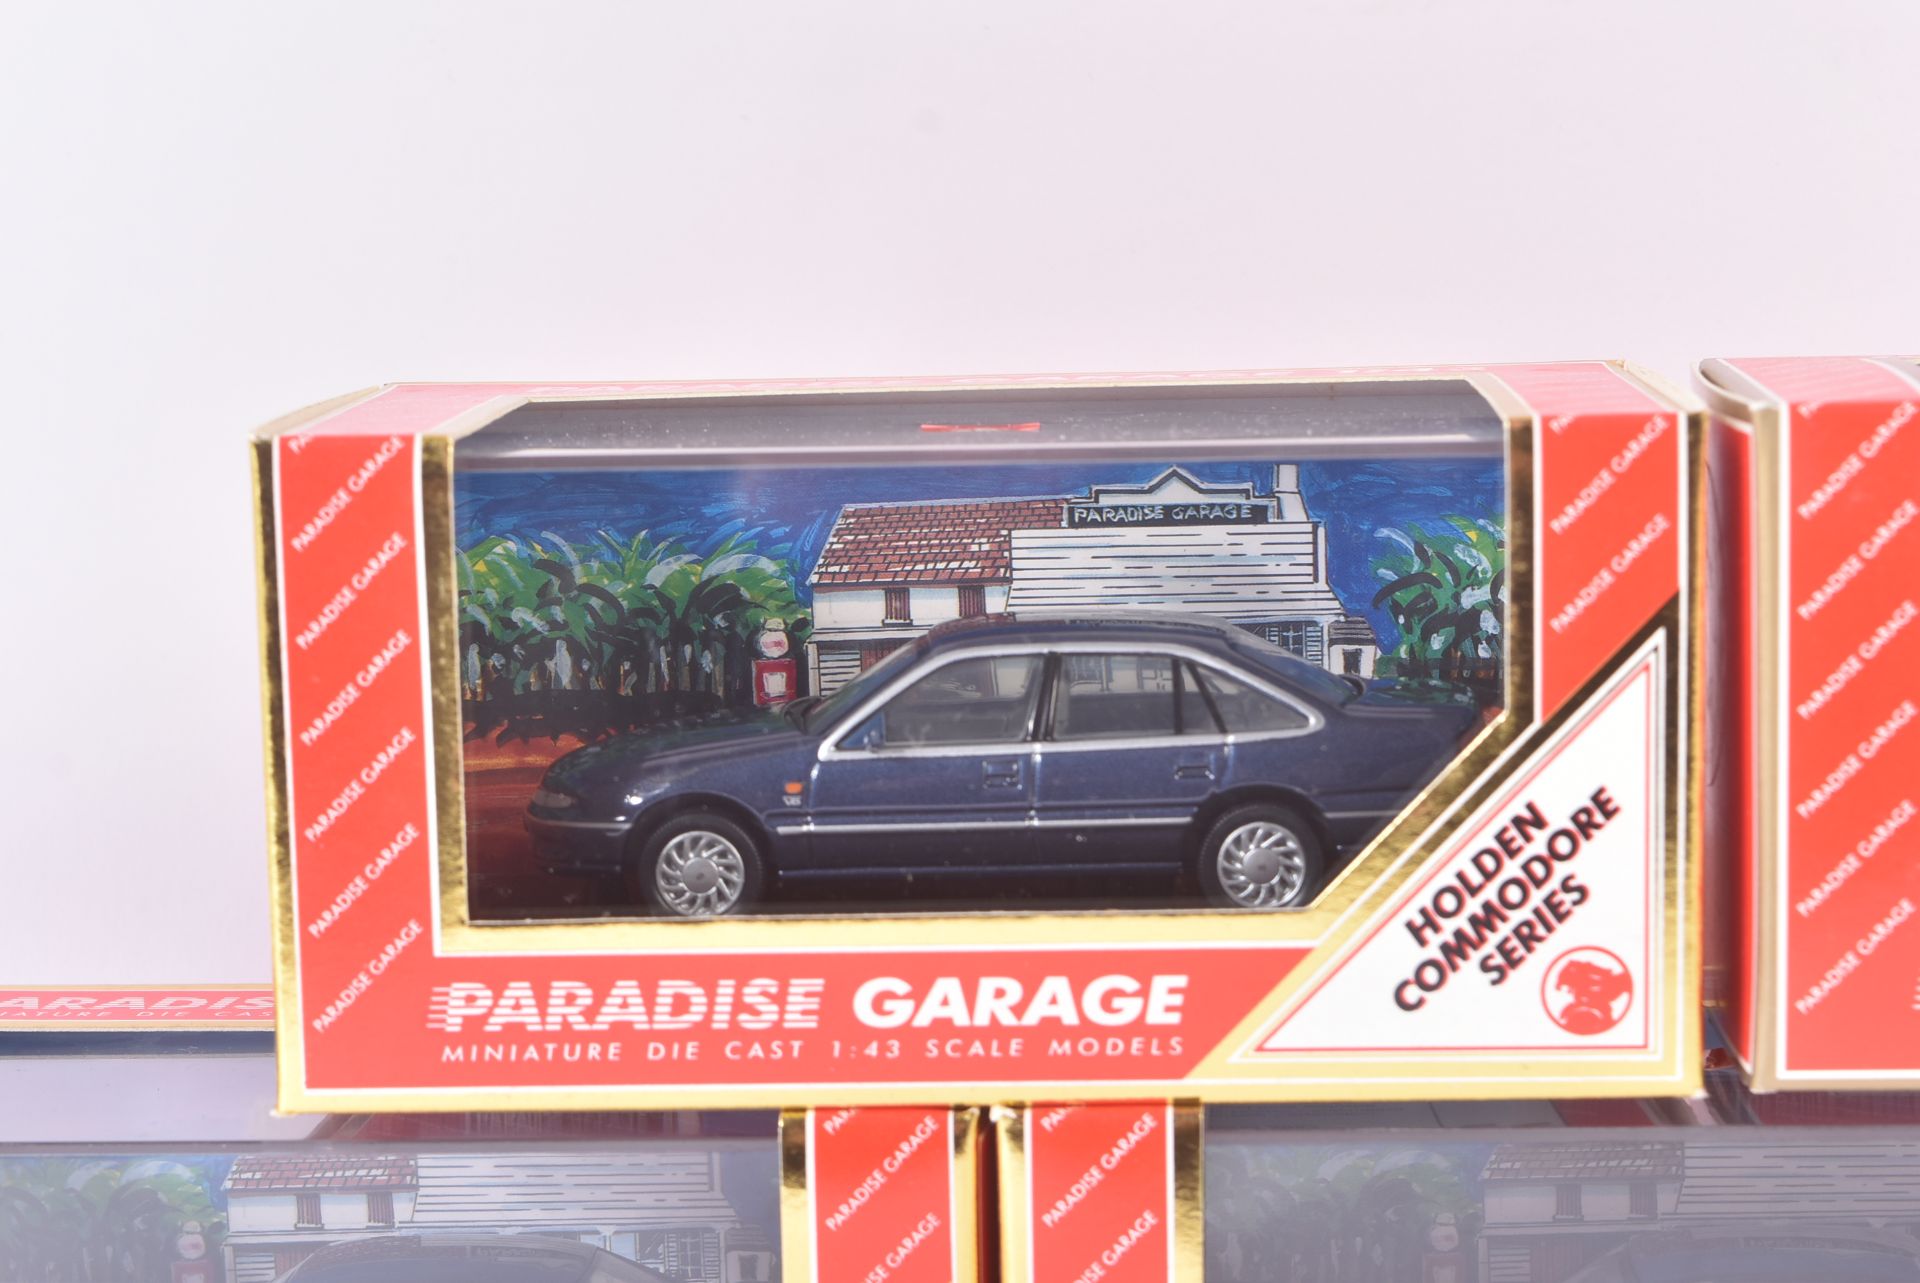 PARADISE GARAGE - 1/43 SCALE PRECISION DIECAST MODELS - Image 2 of 5